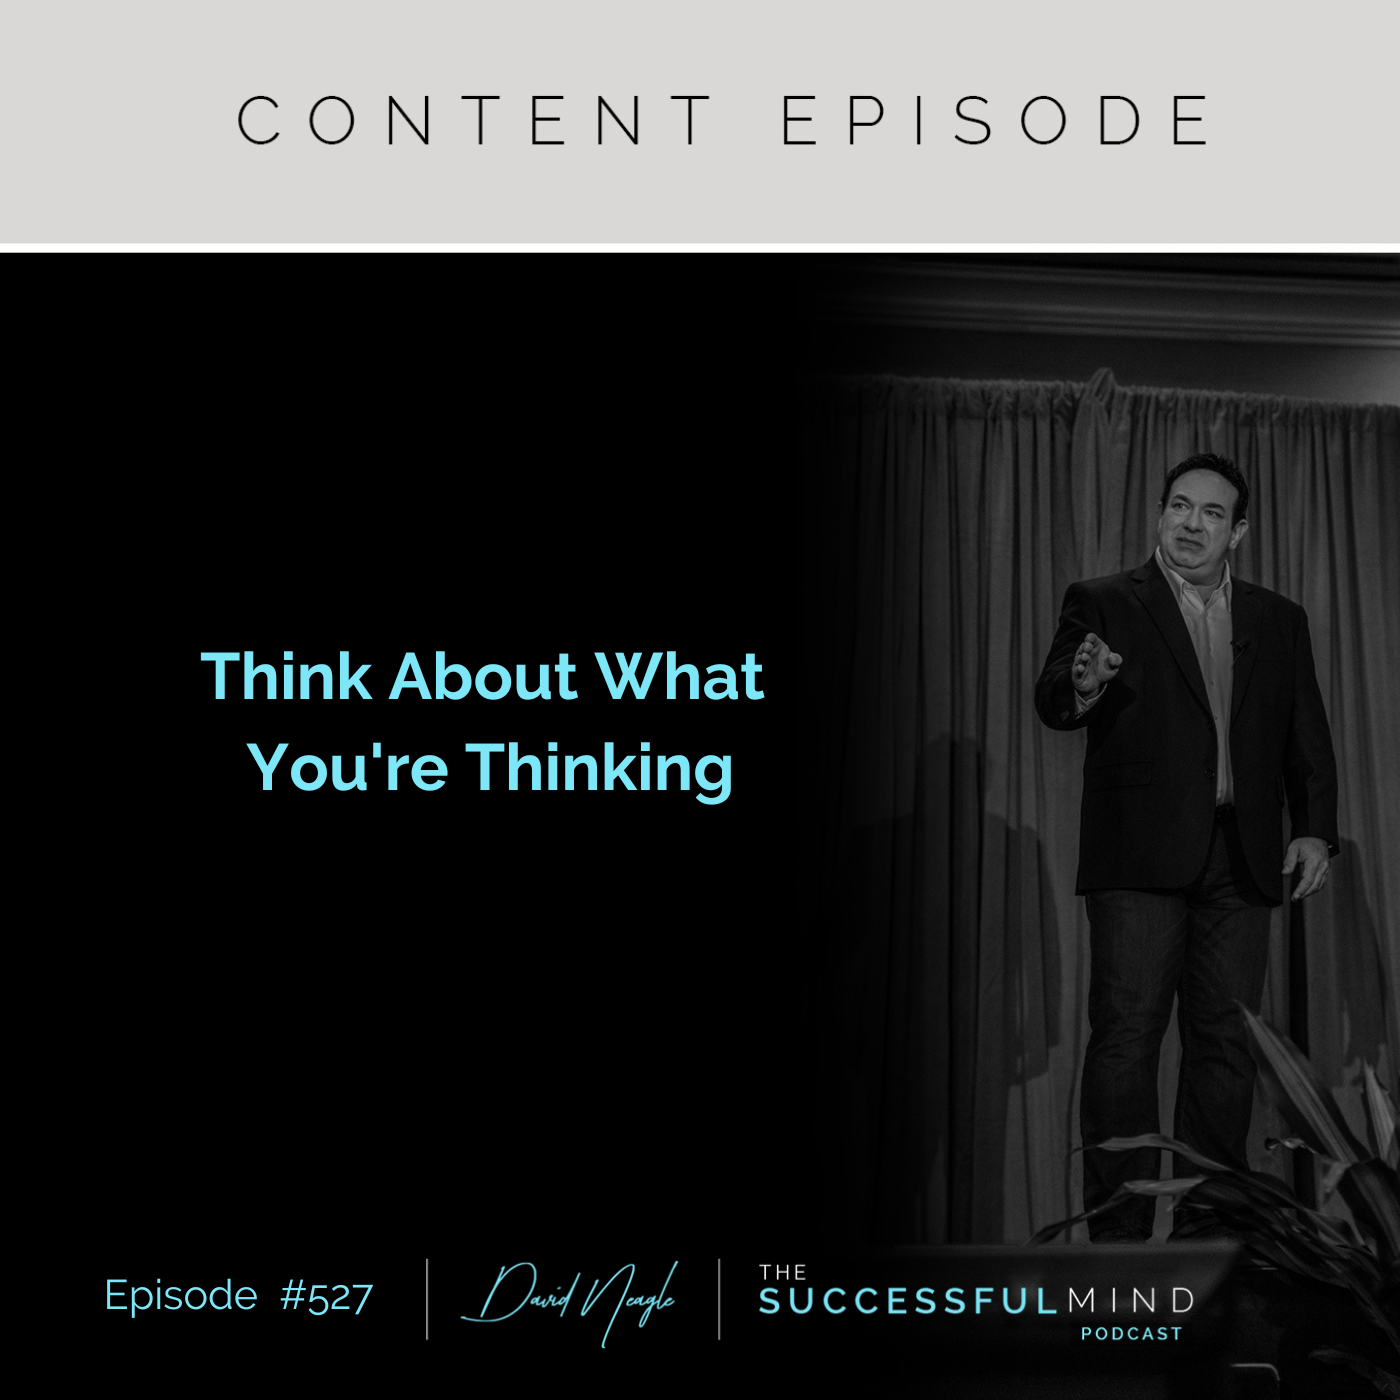 The Successful Mind Podcast - Episode 527 - Think About What You're Thinking